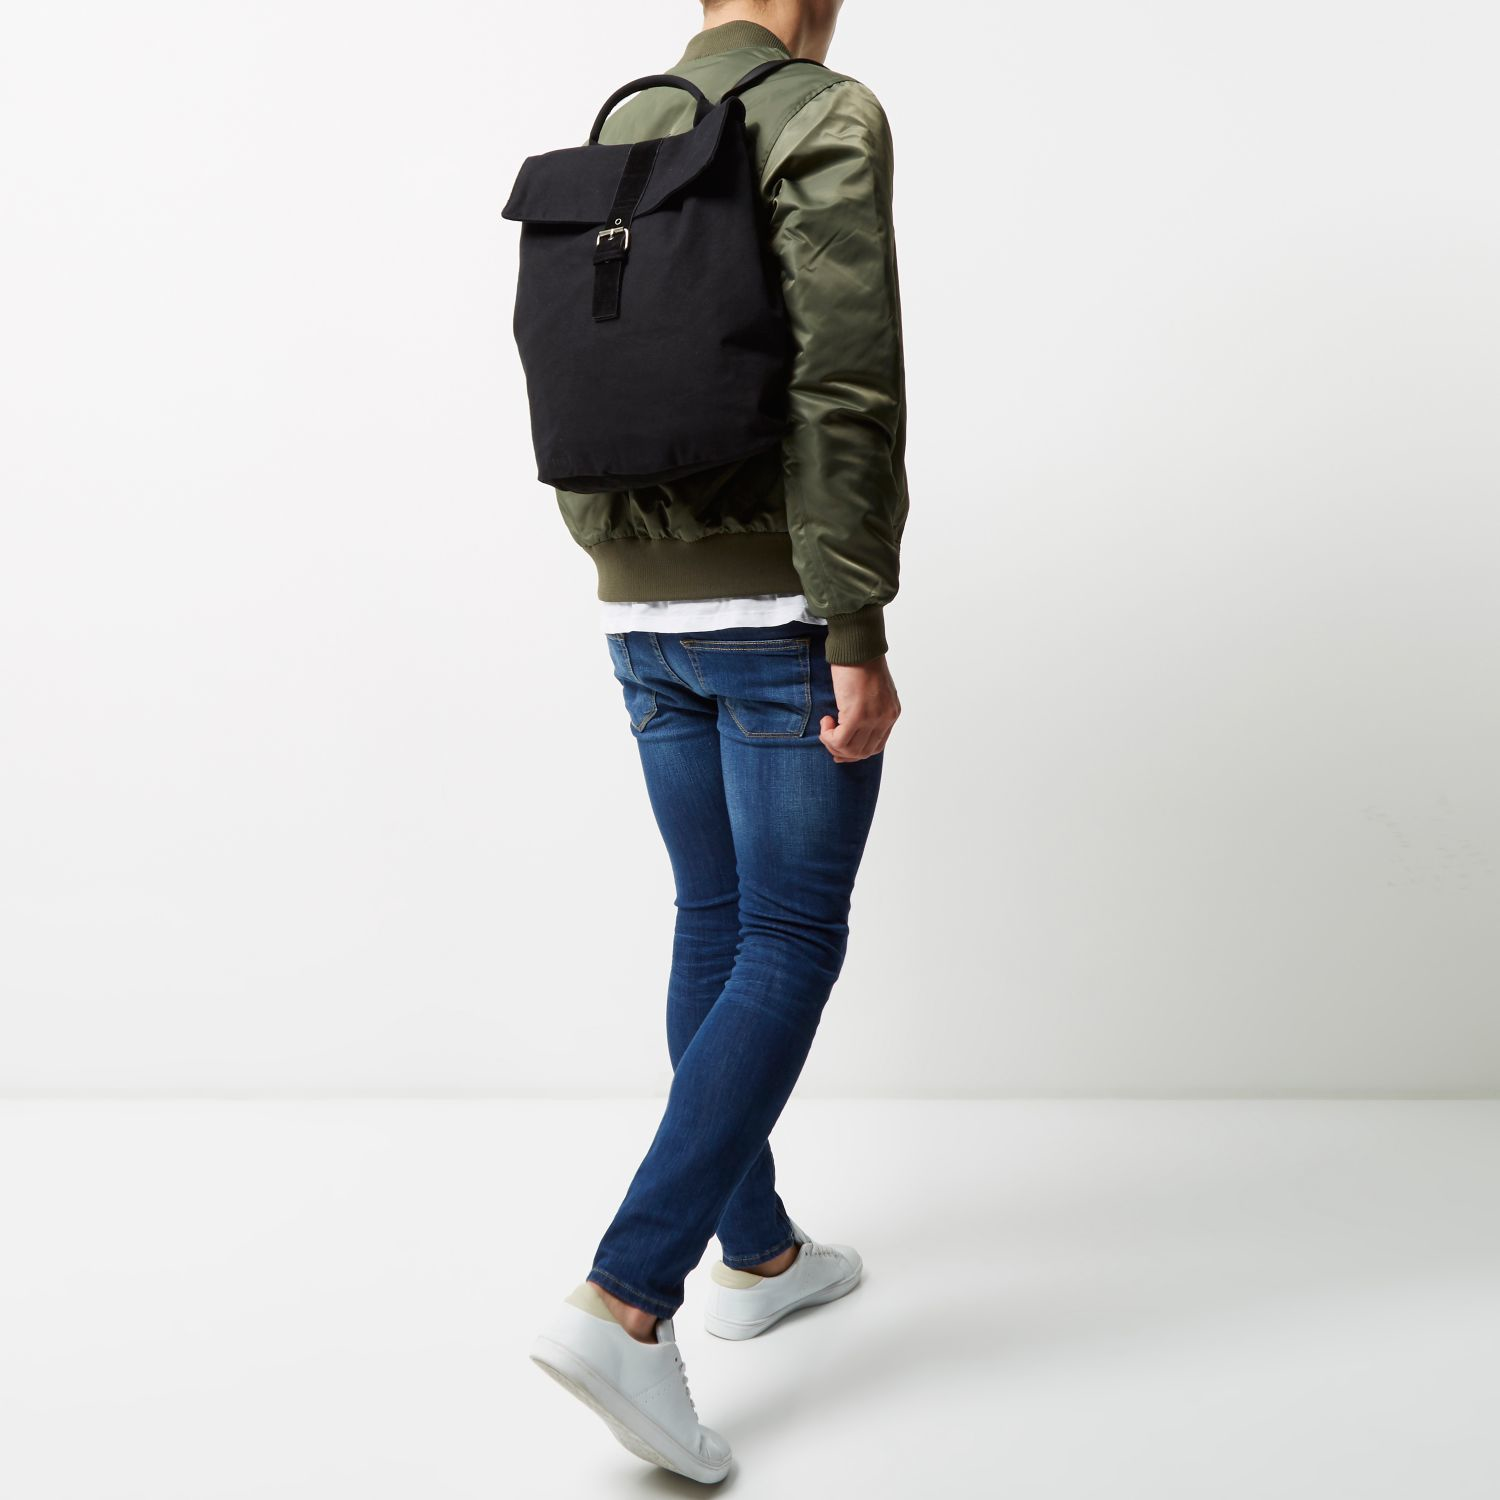 River Island Black Mi-pac Canvas Buckle Backpack for Men - Lyst